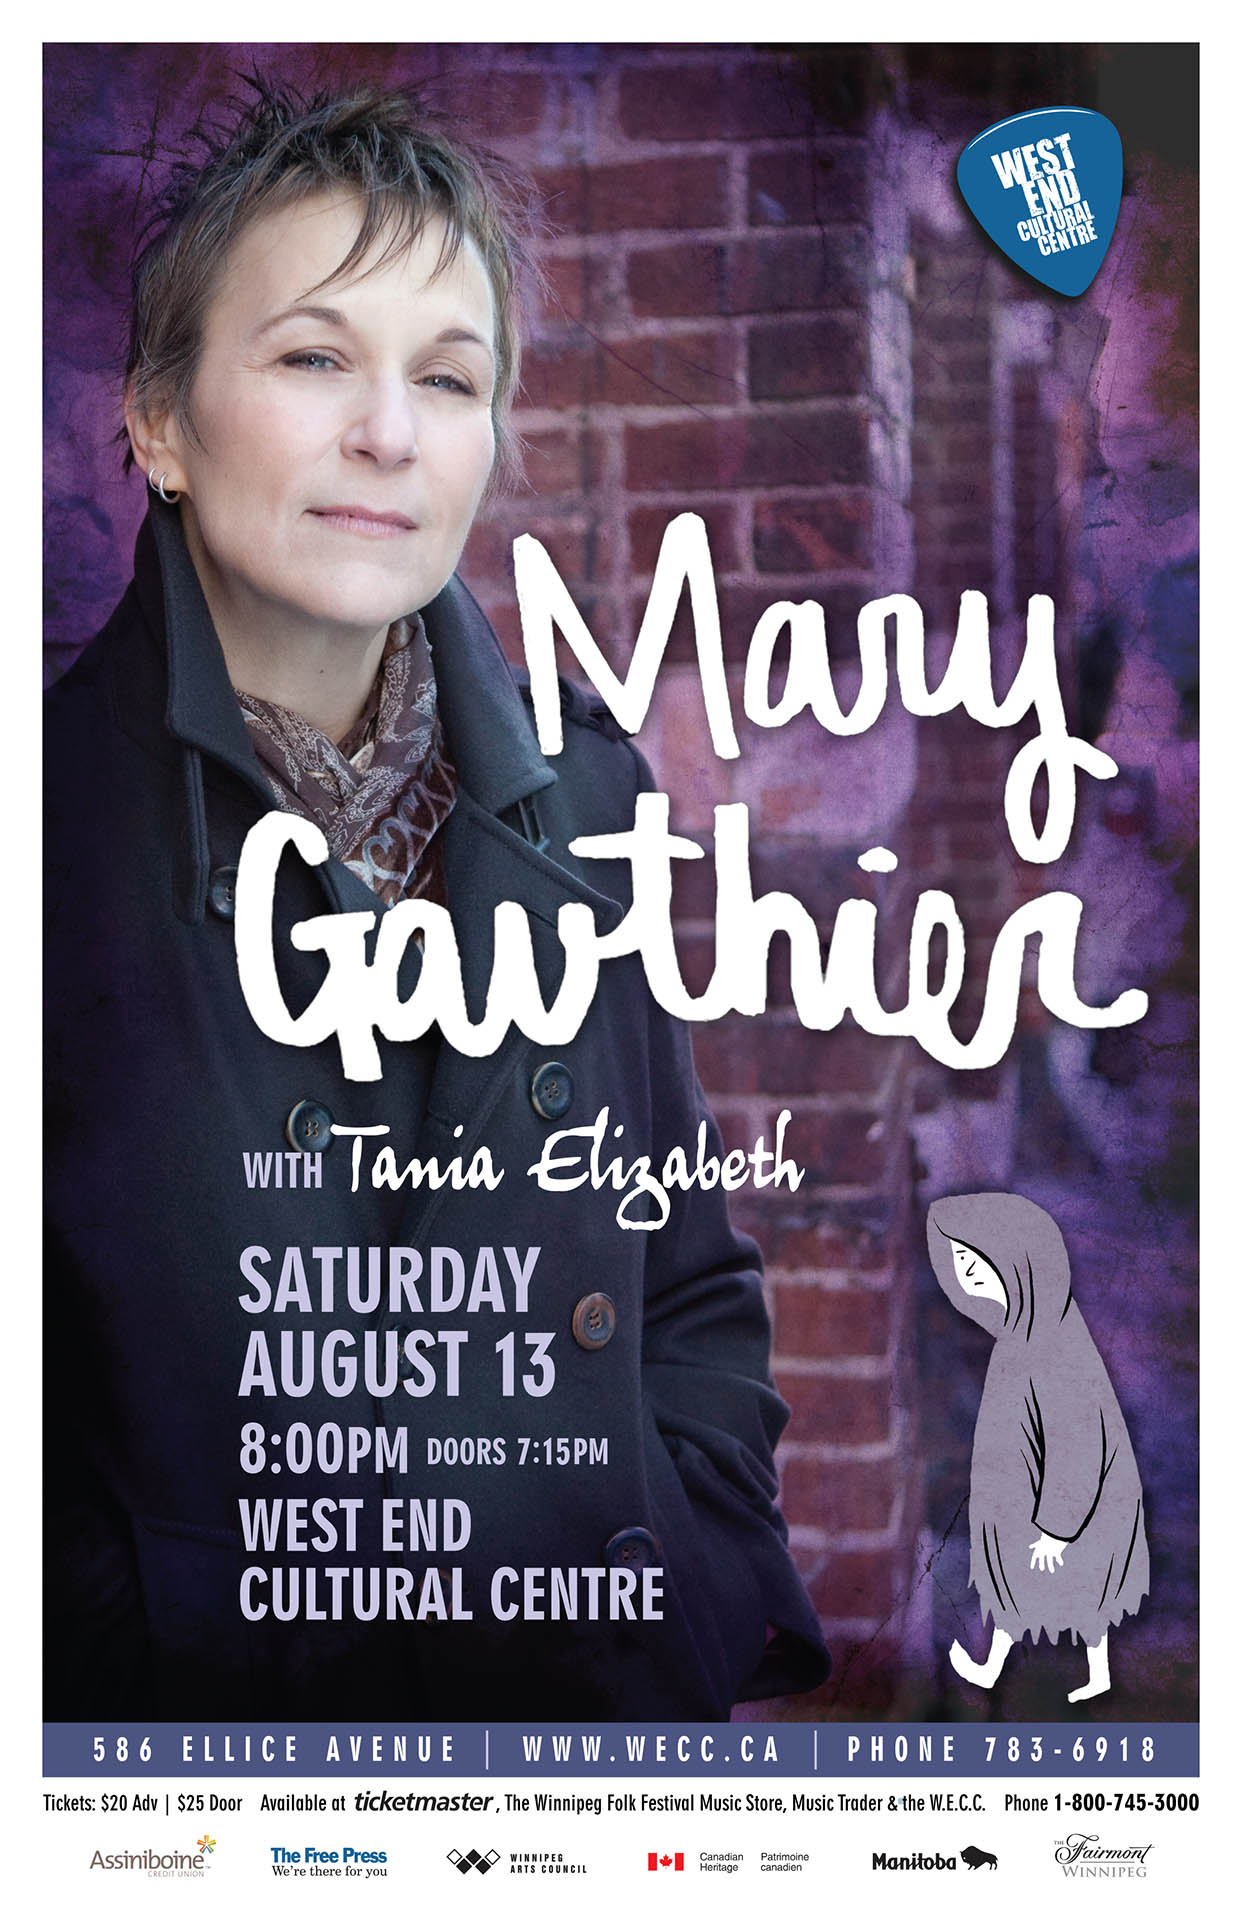 MARY GAUTHIER – 2011